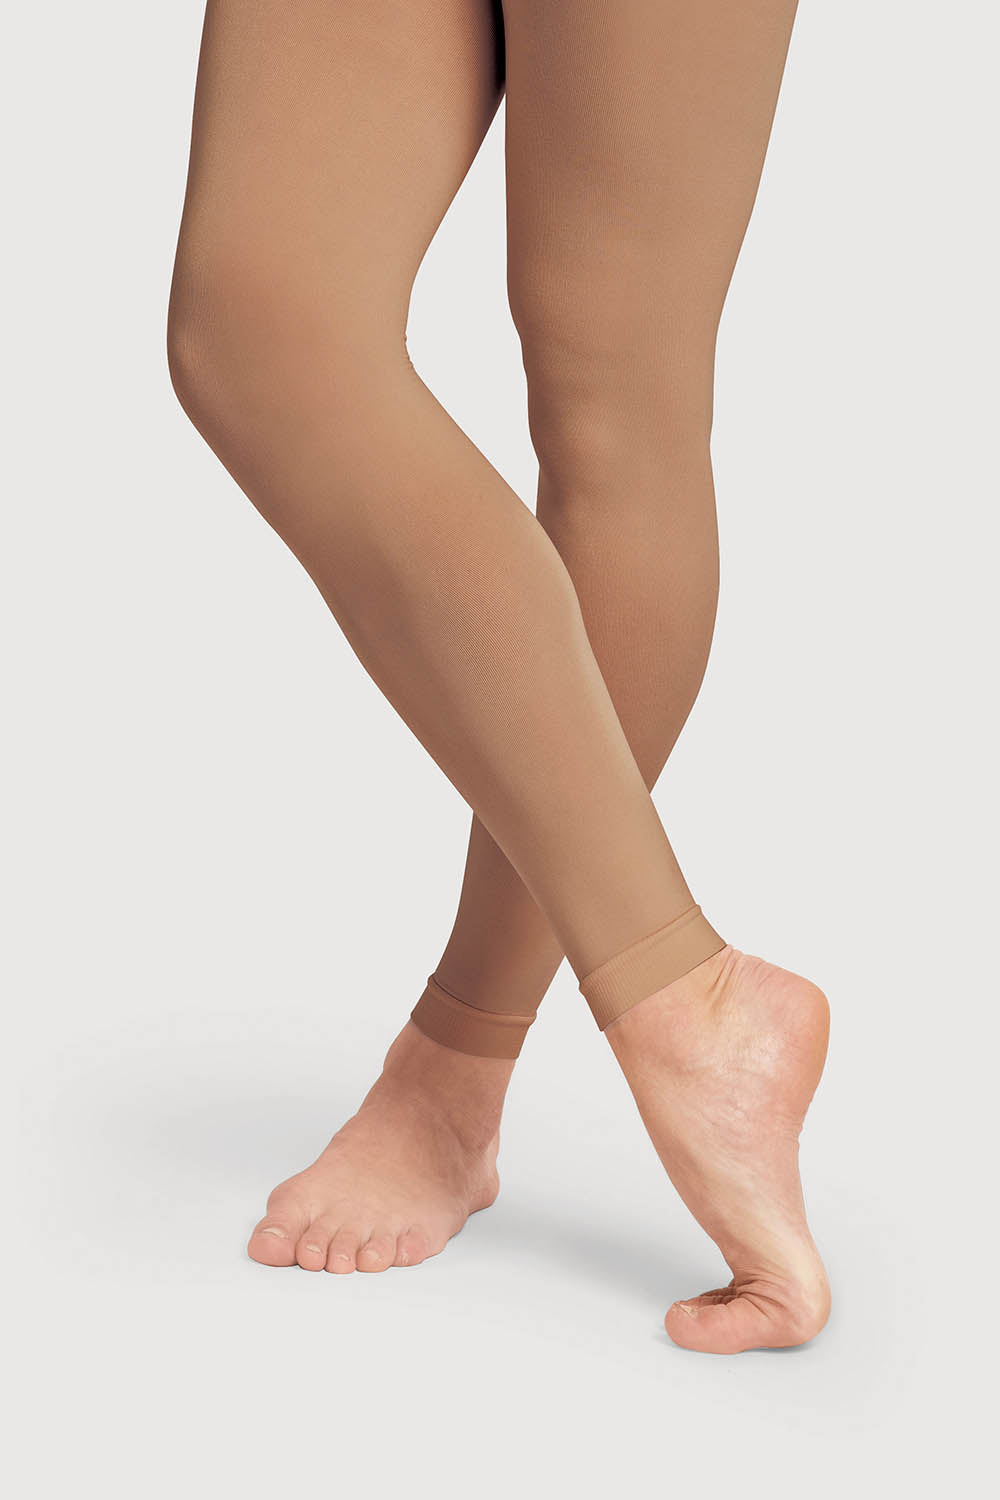 T0985L - Bloch Contoursoft Womens Footless Tights